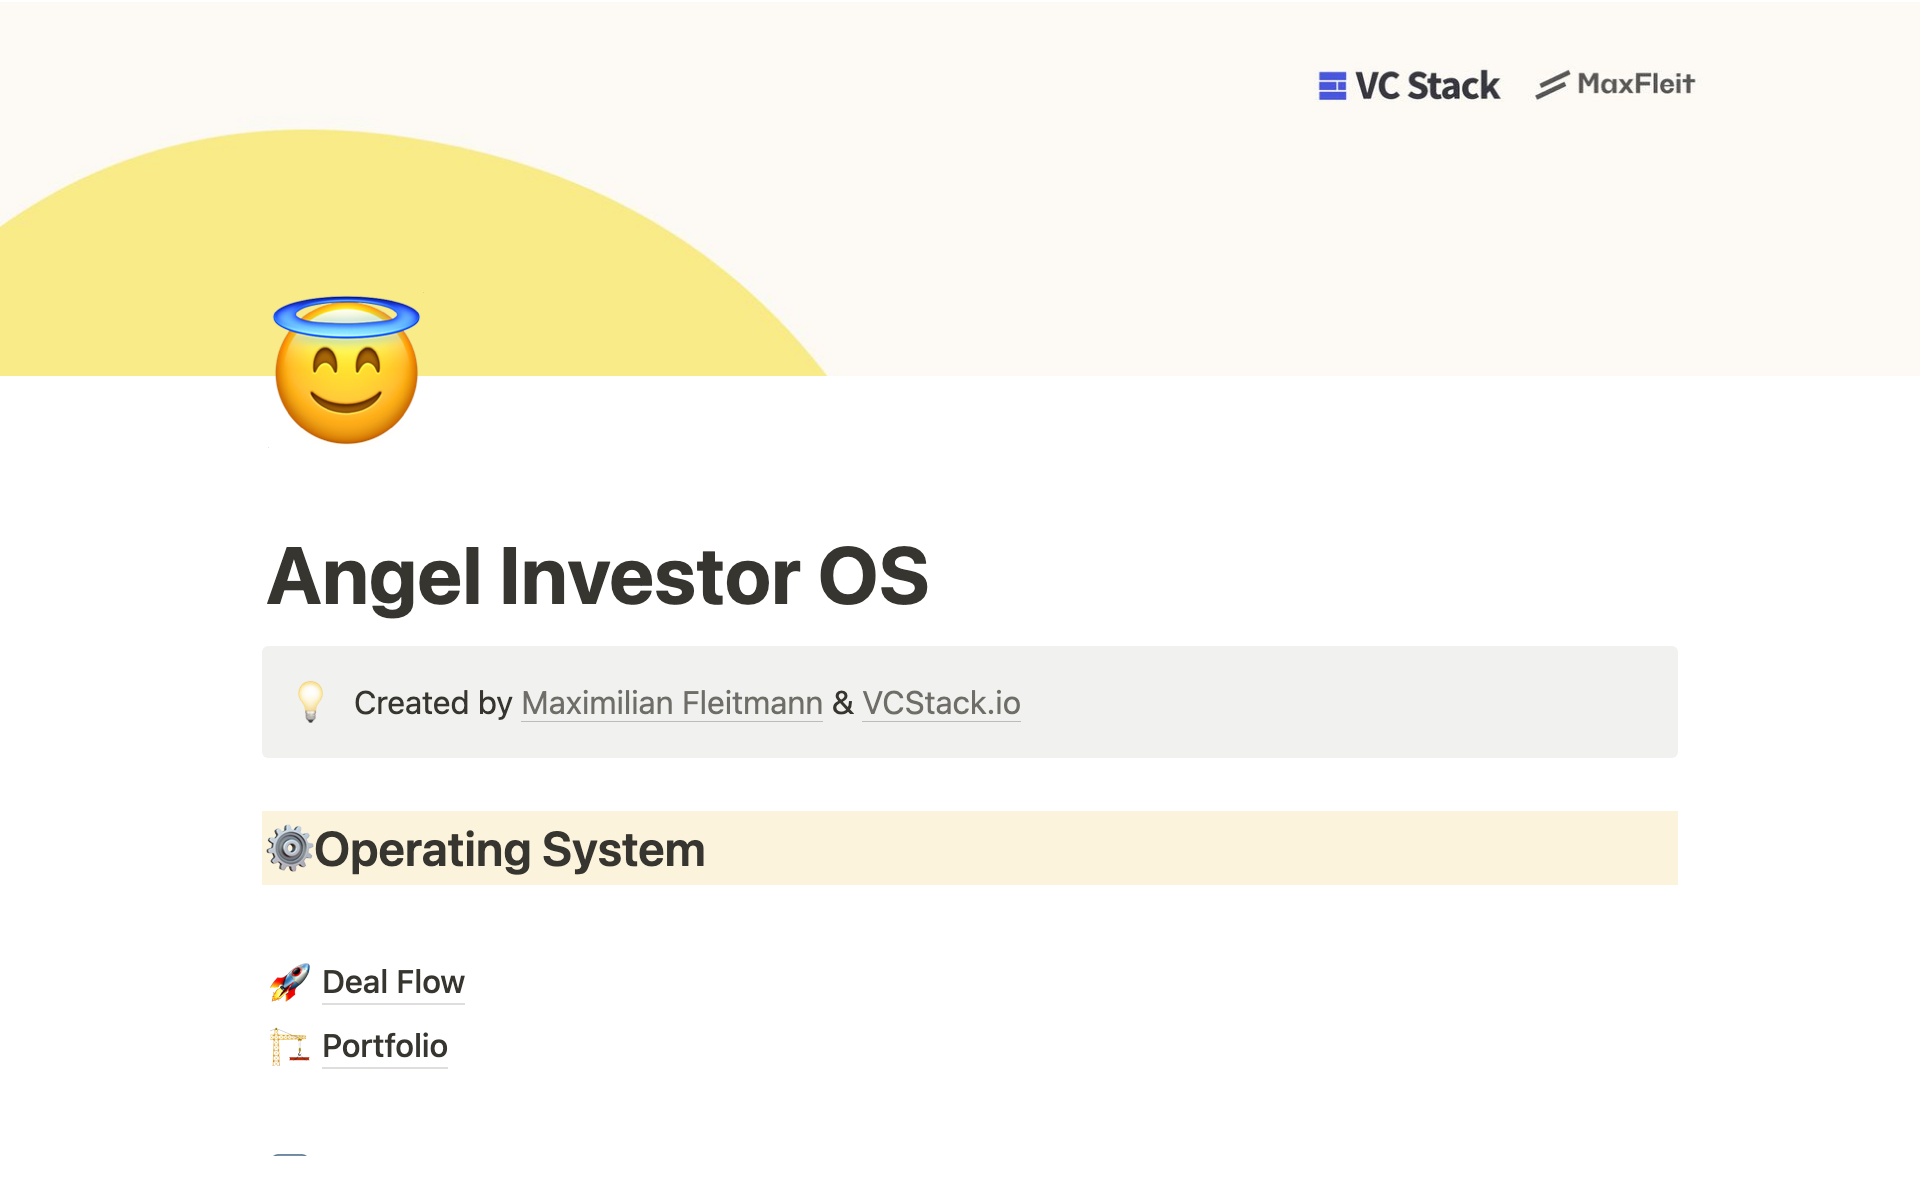 Do you want to professionalize your angel investing? This template helps you manage everything from sourcing to portfolio monitoring in one place.